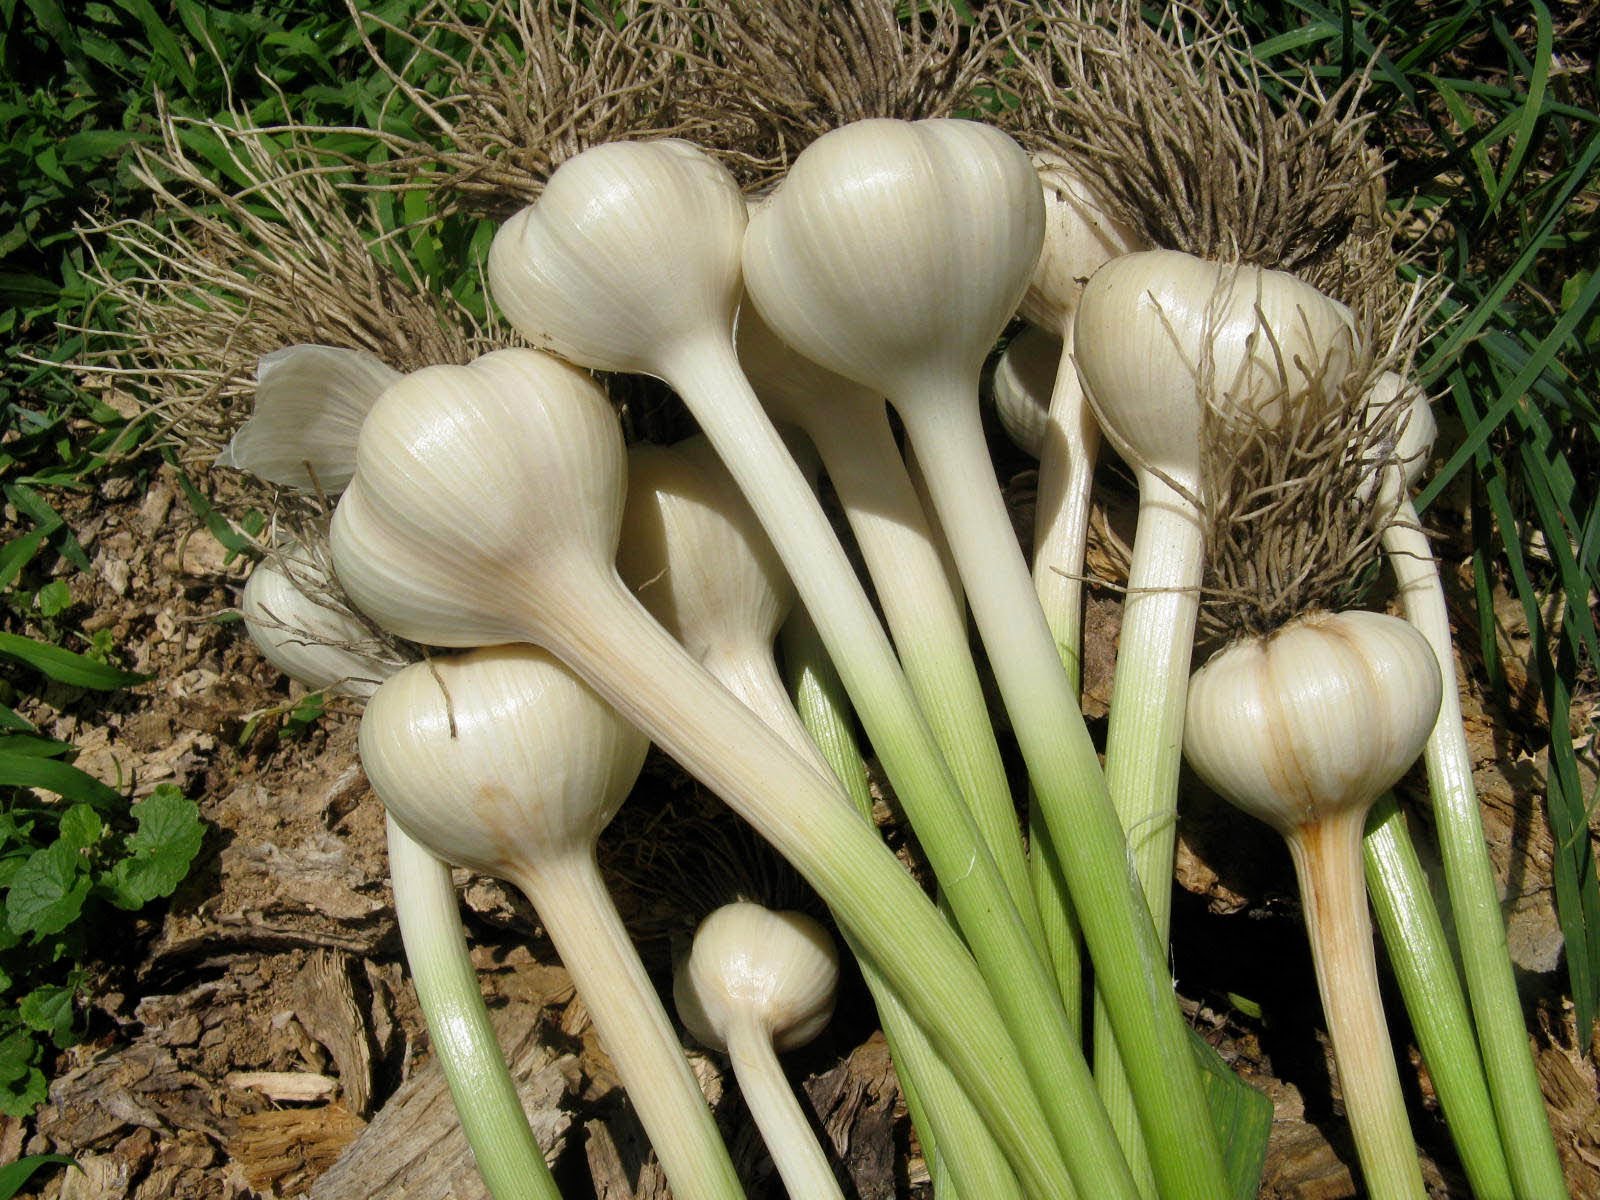 Unknown facts about Garlic